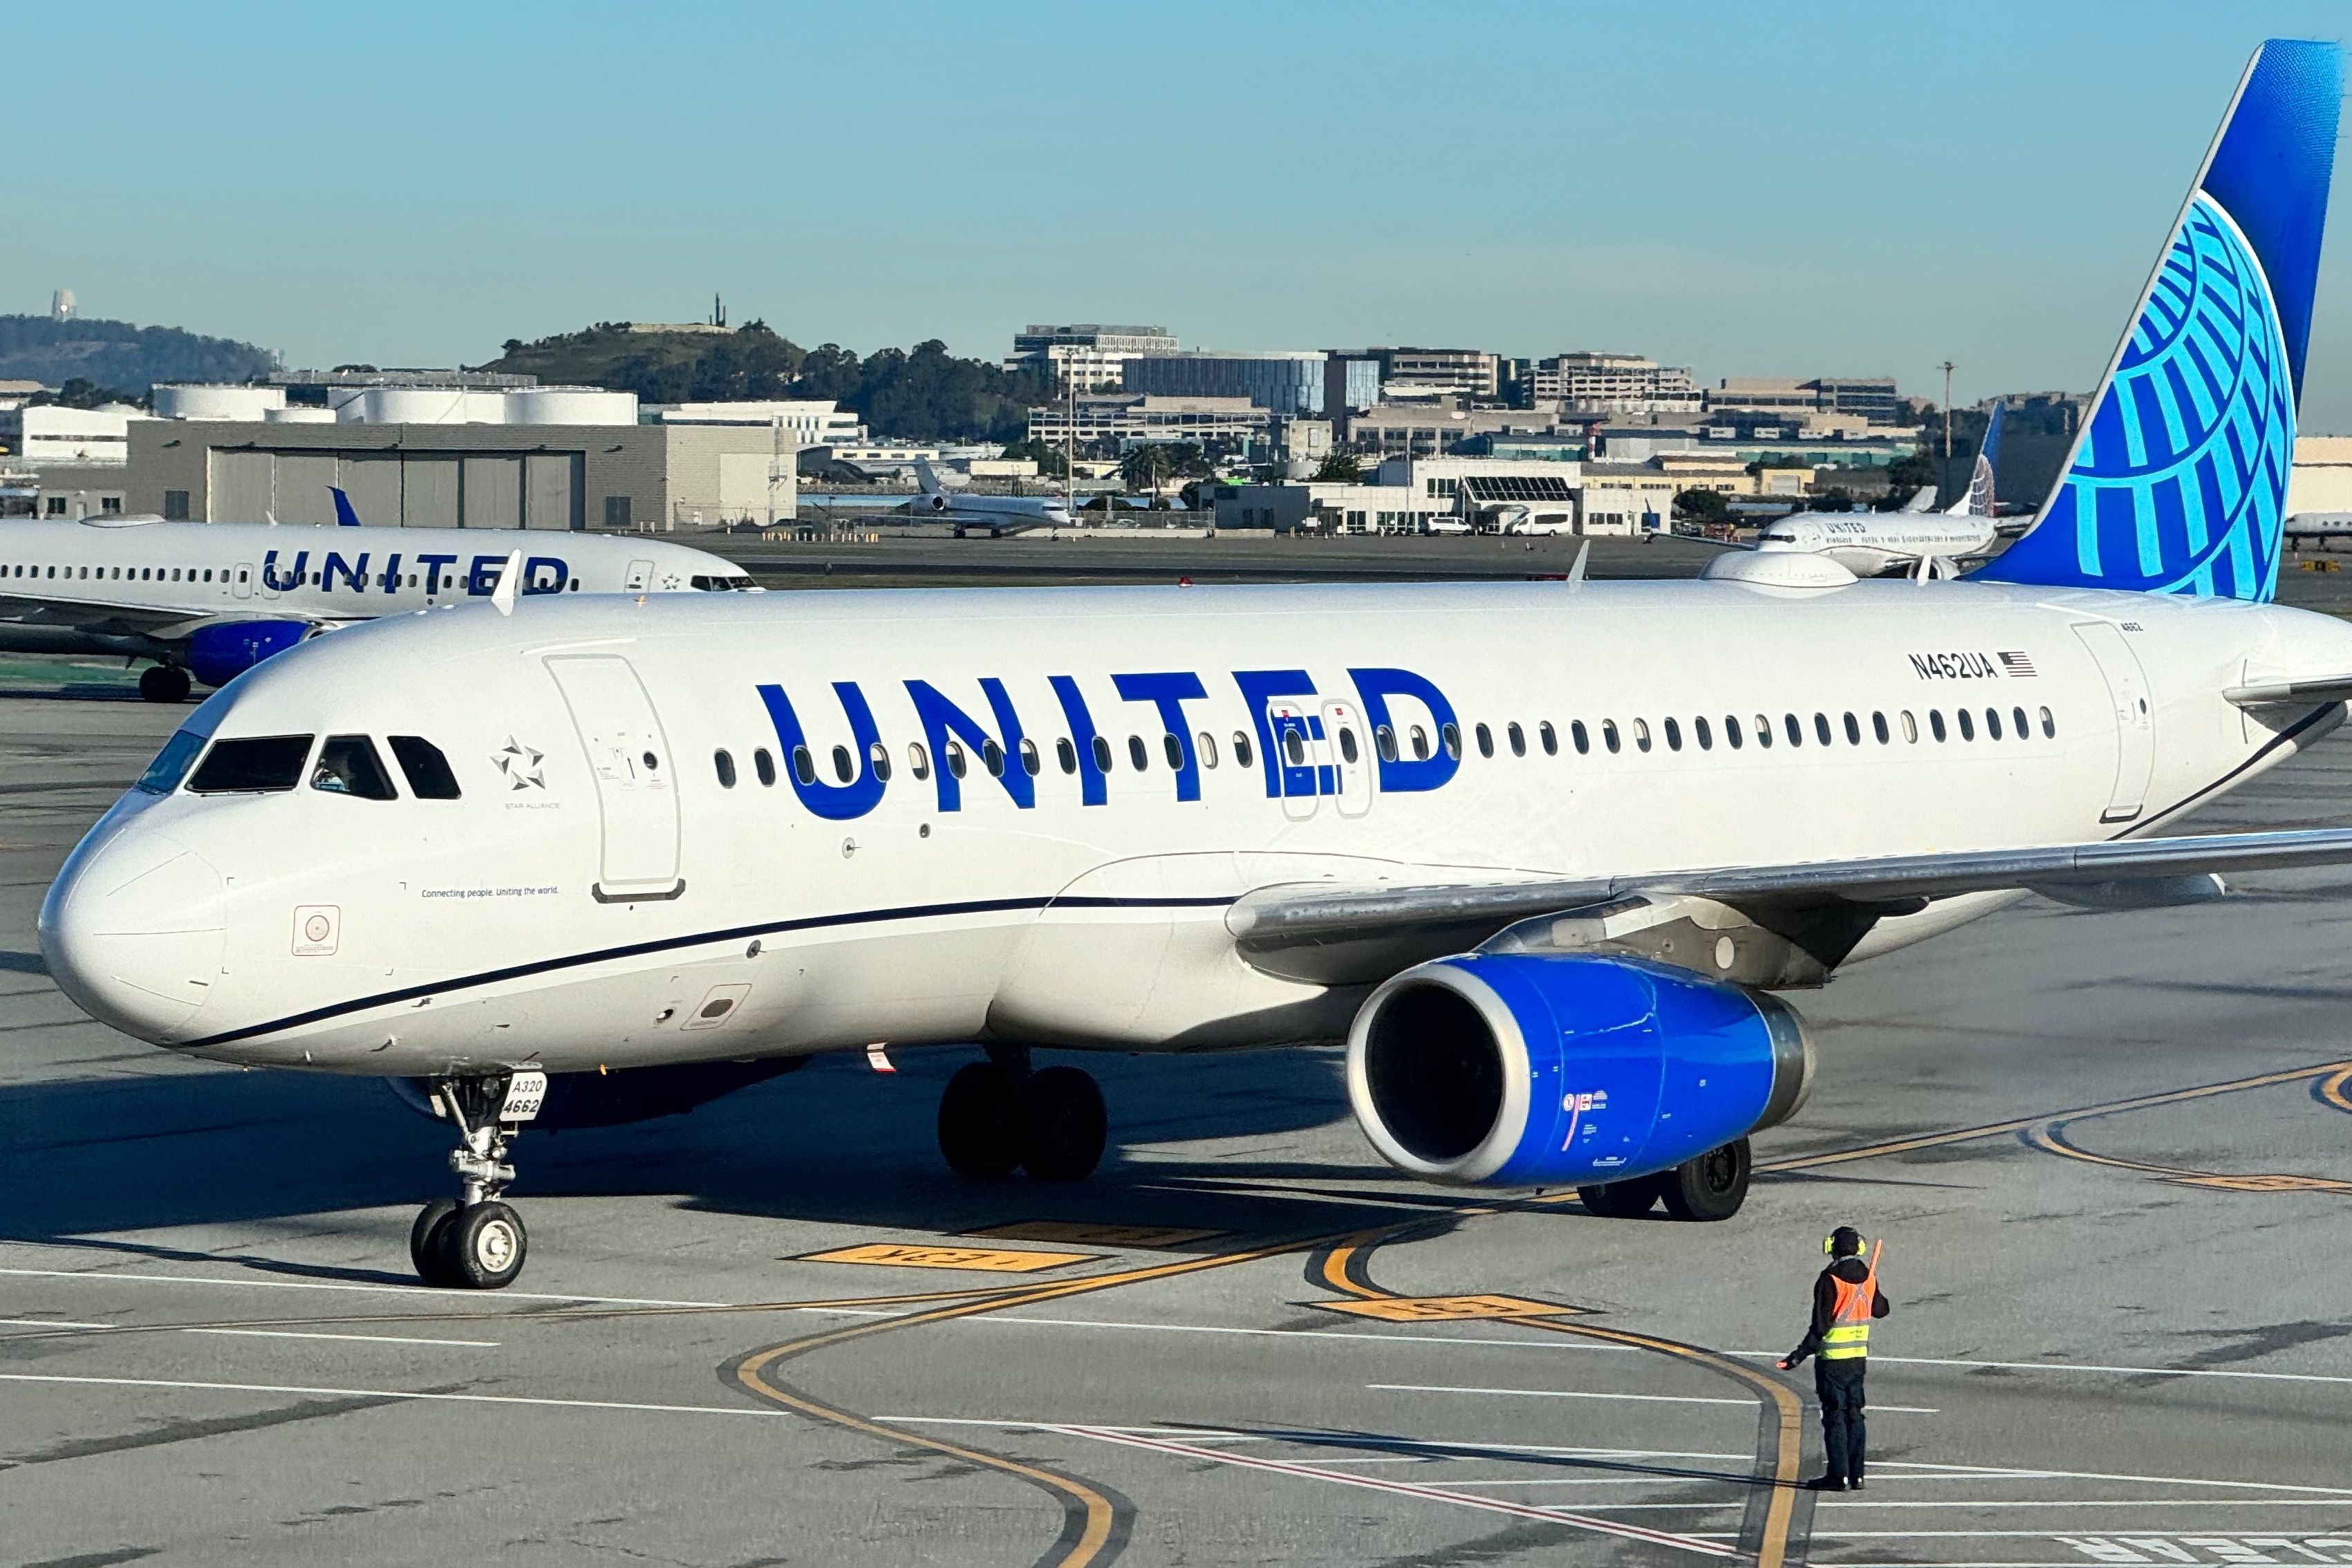 United Airlines Airbus A320 at SFO